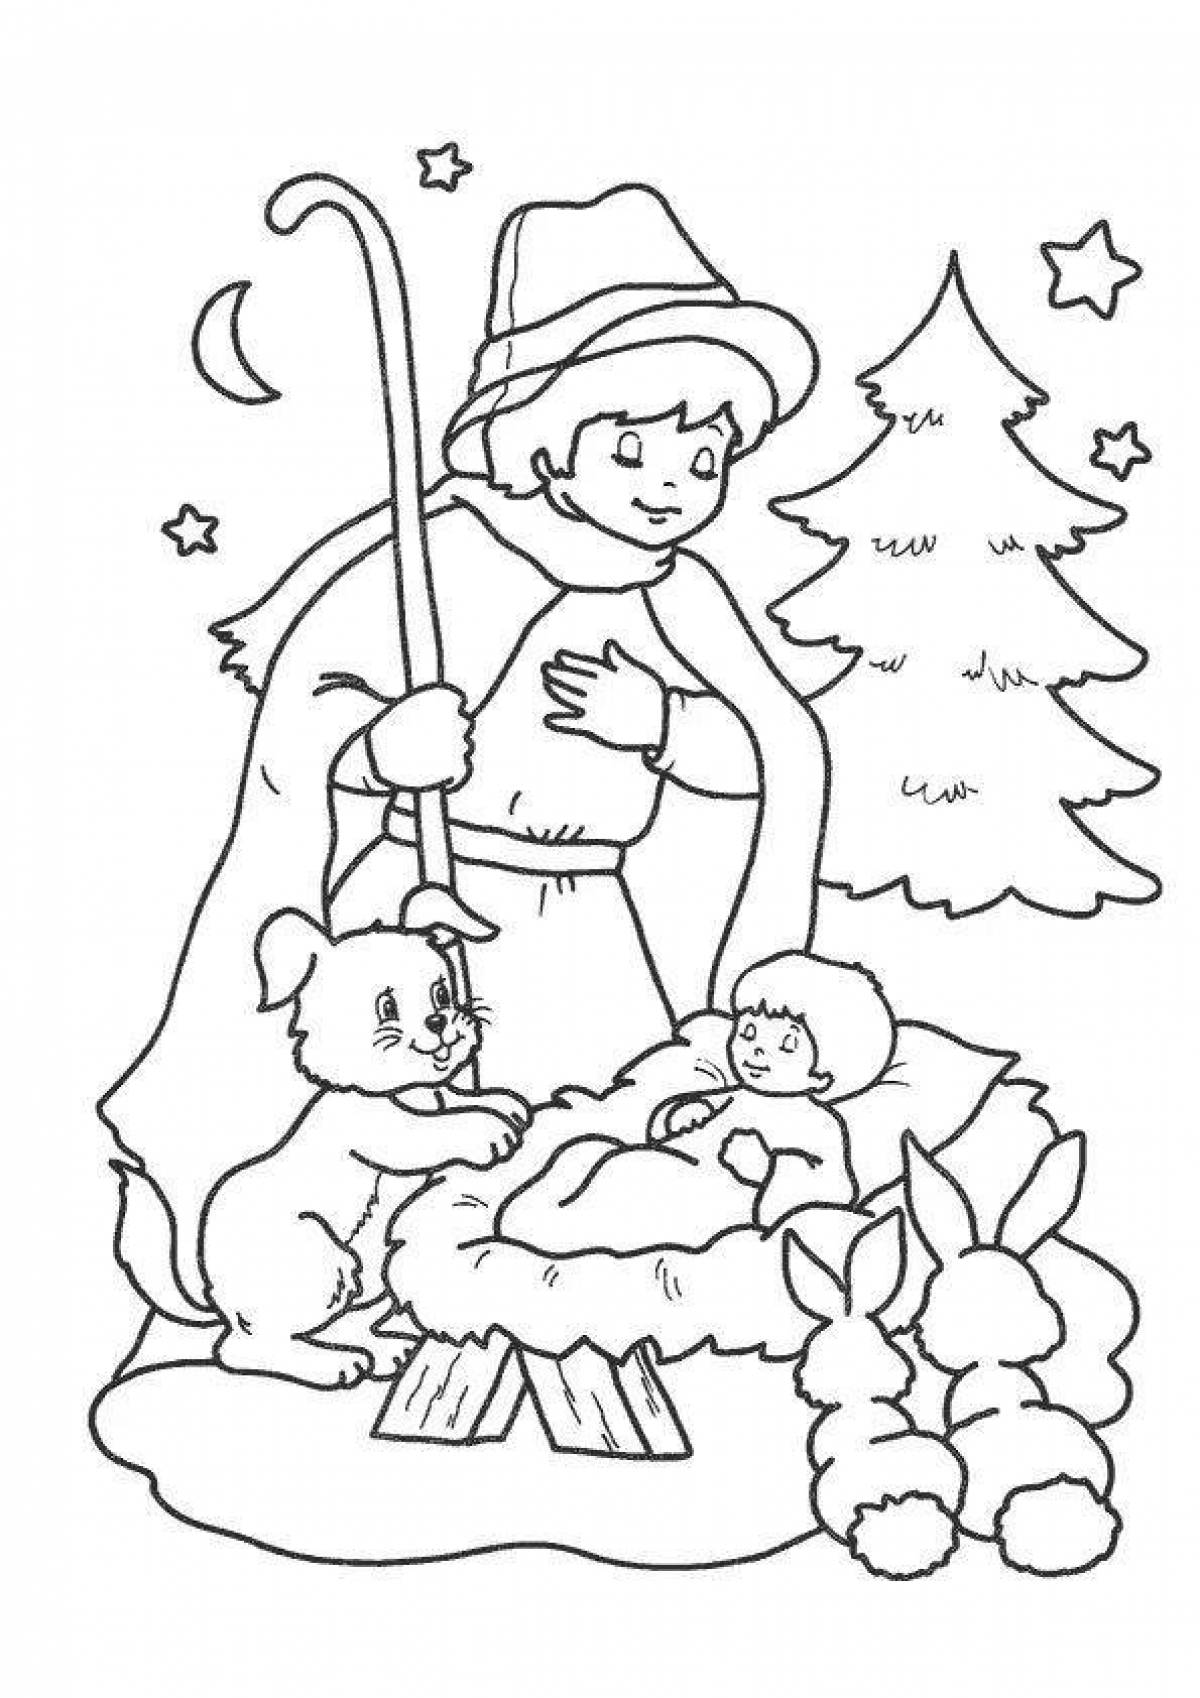 Humorous Christmas coloring book for 6-7 year olds